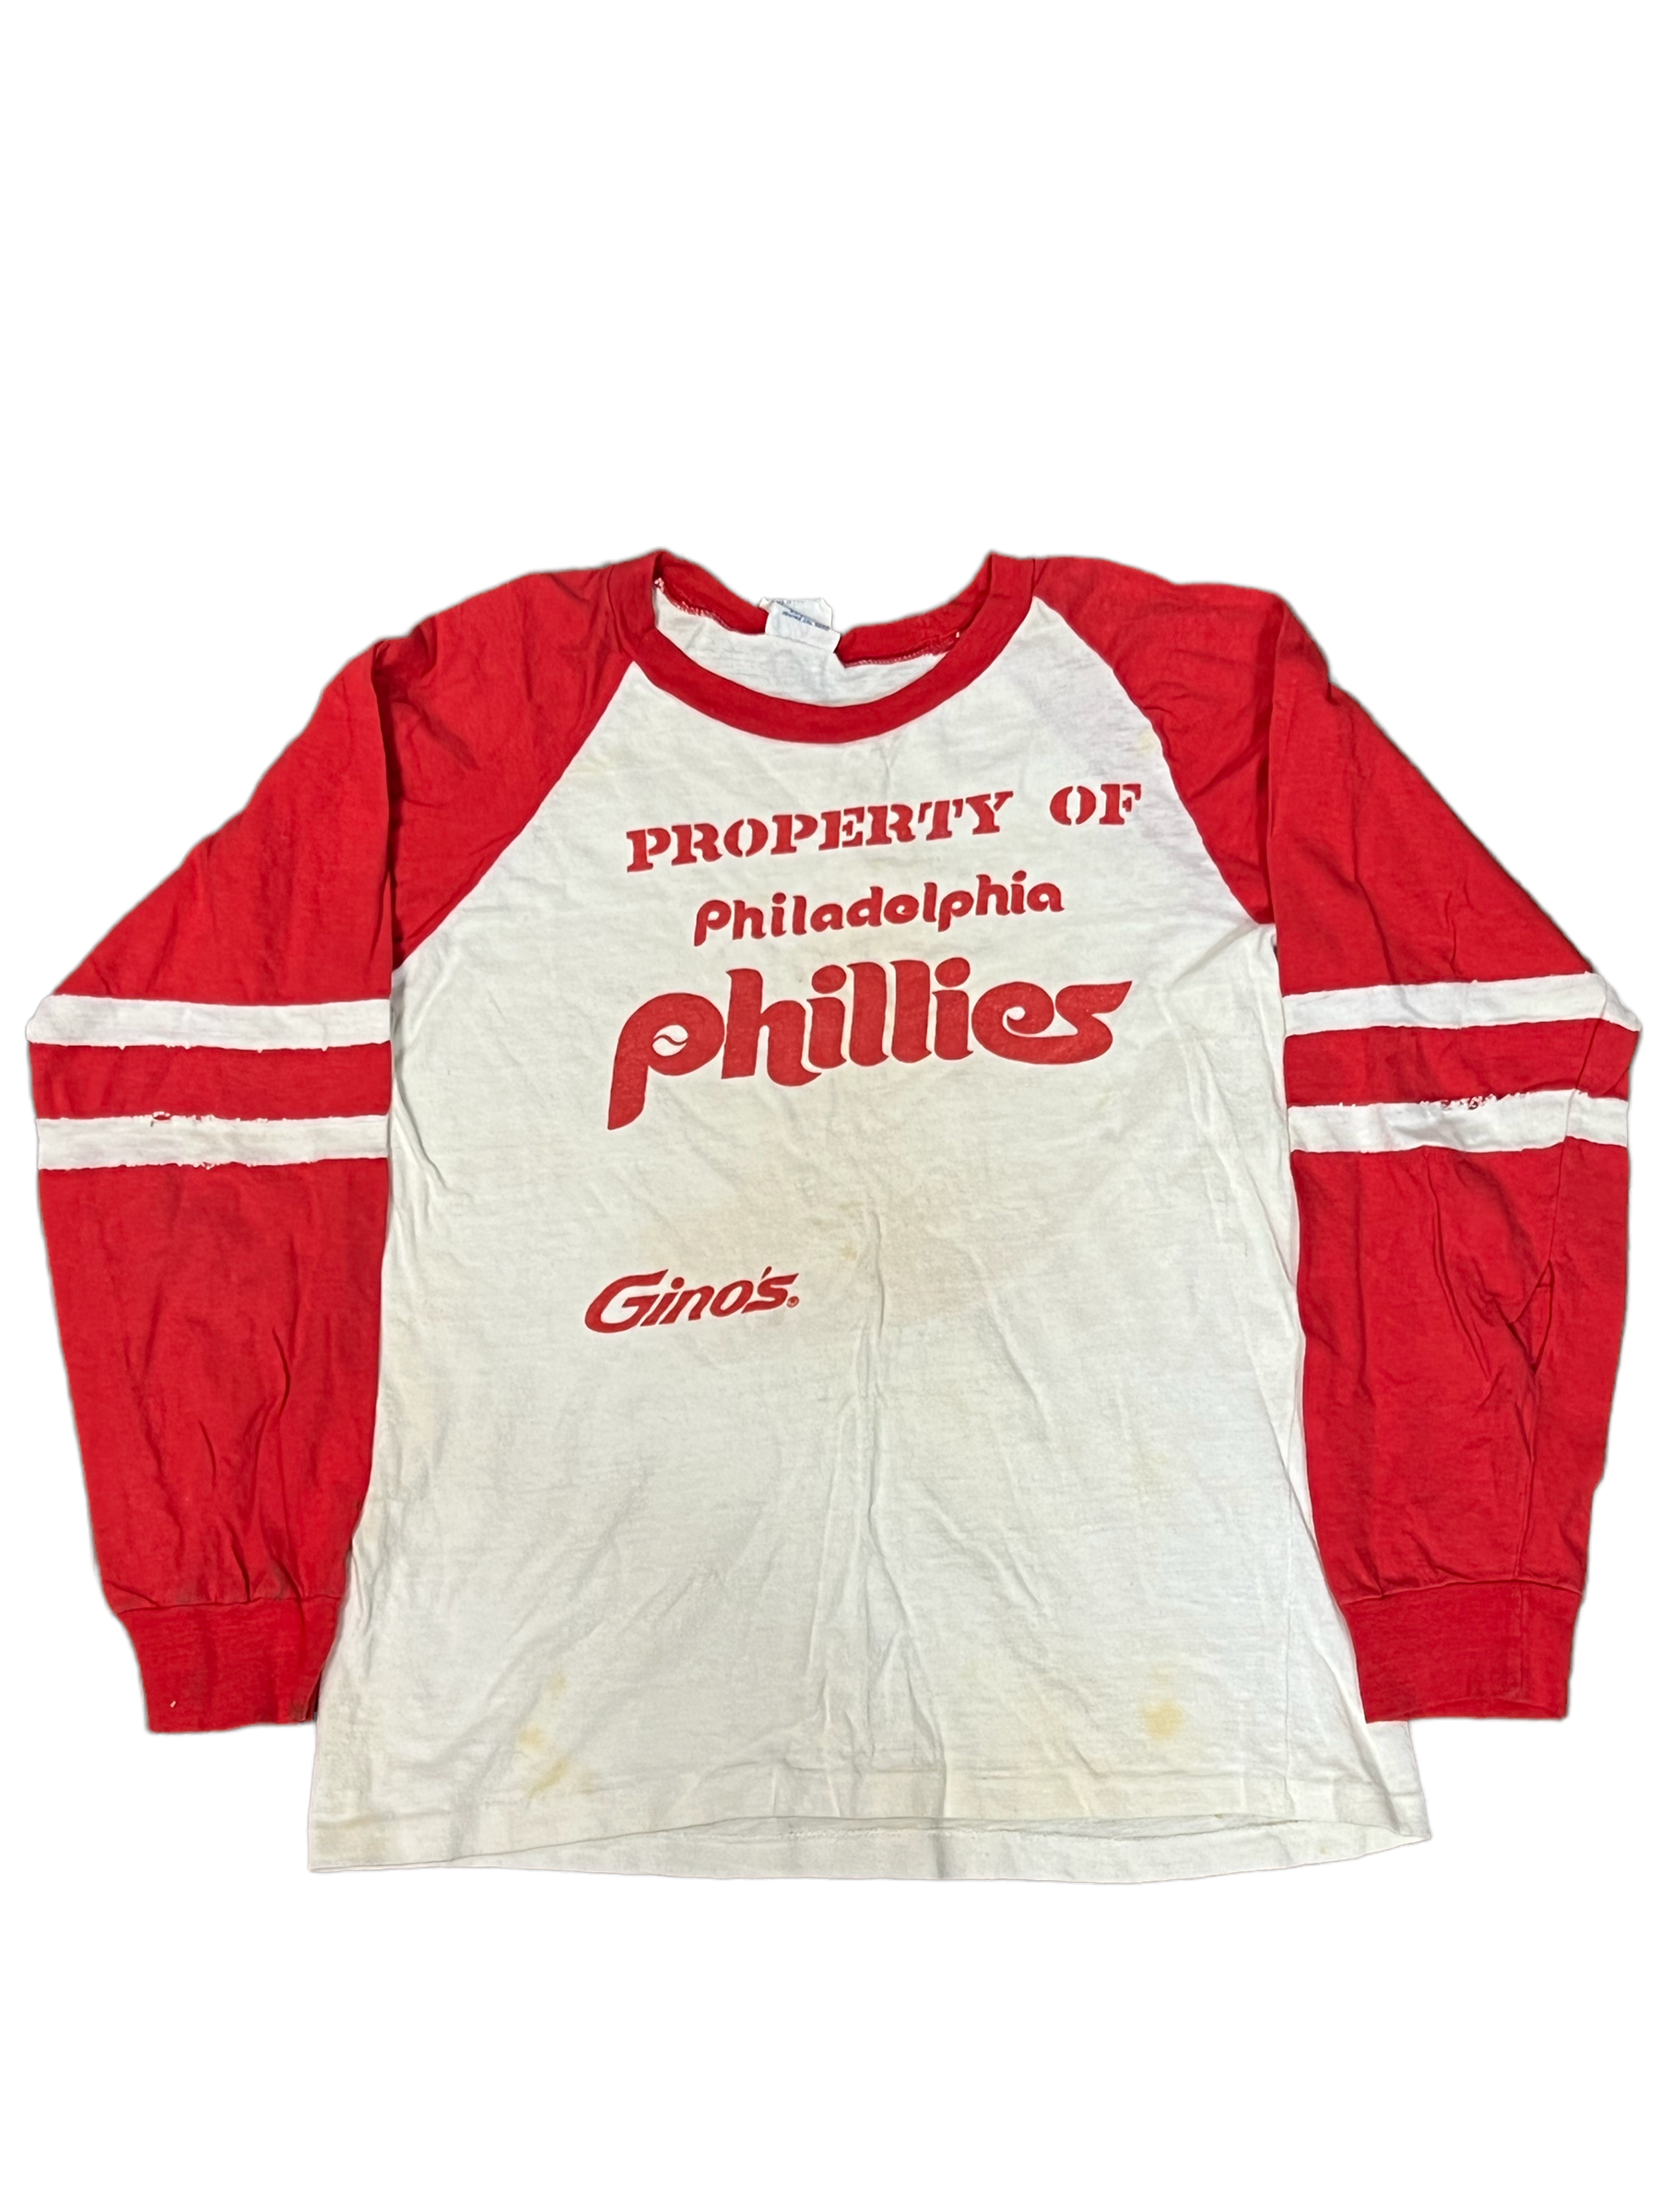 phillies youth t shirts